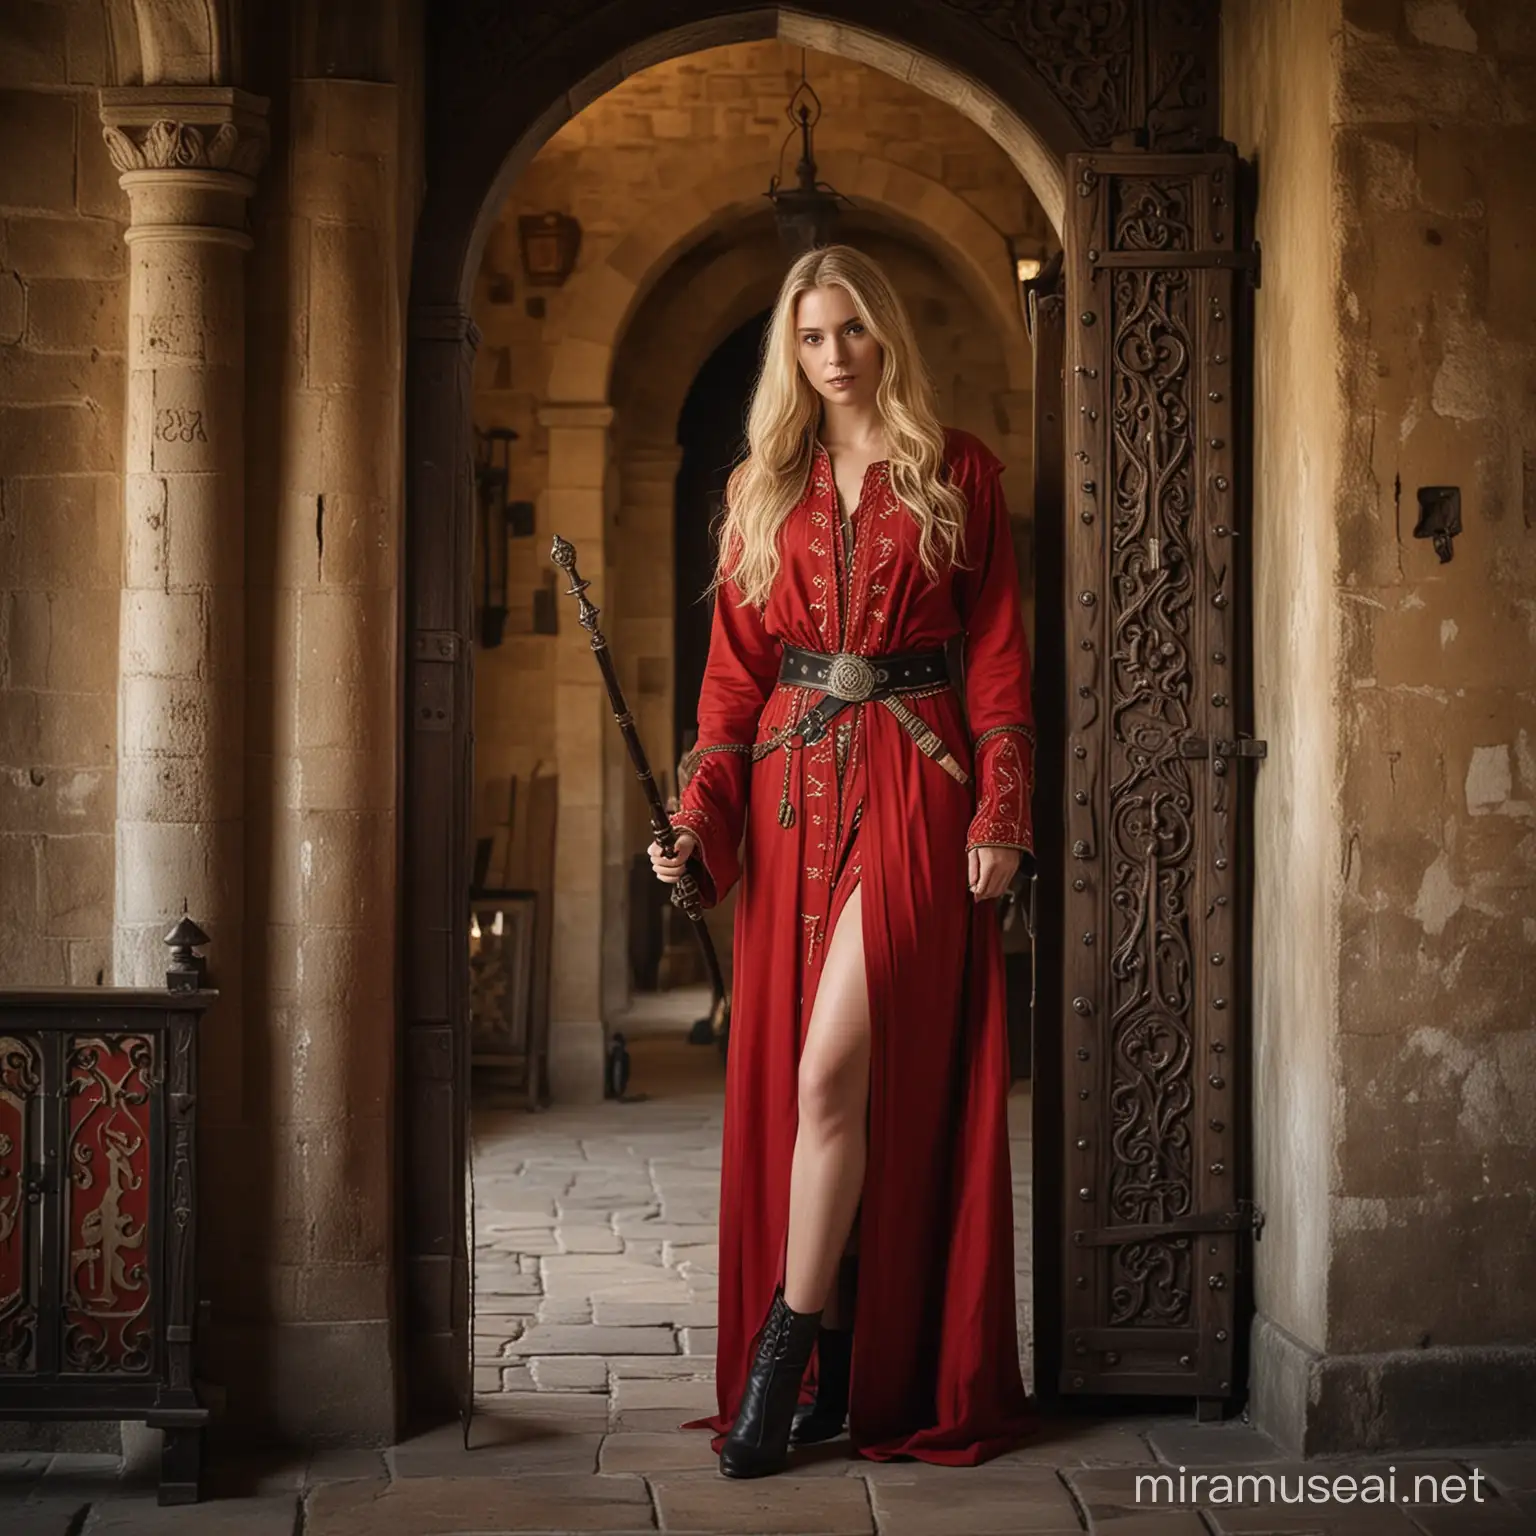 Photo medieval style: a 25-year-old average looking woman with long, blonde hair, dressed in a slit, noble red robe with magic symbols, a long, straight walking stick in her hand and belted with a dagger,stands in a medieval bank house and looks friendly. Sigma 85mm F/1.4